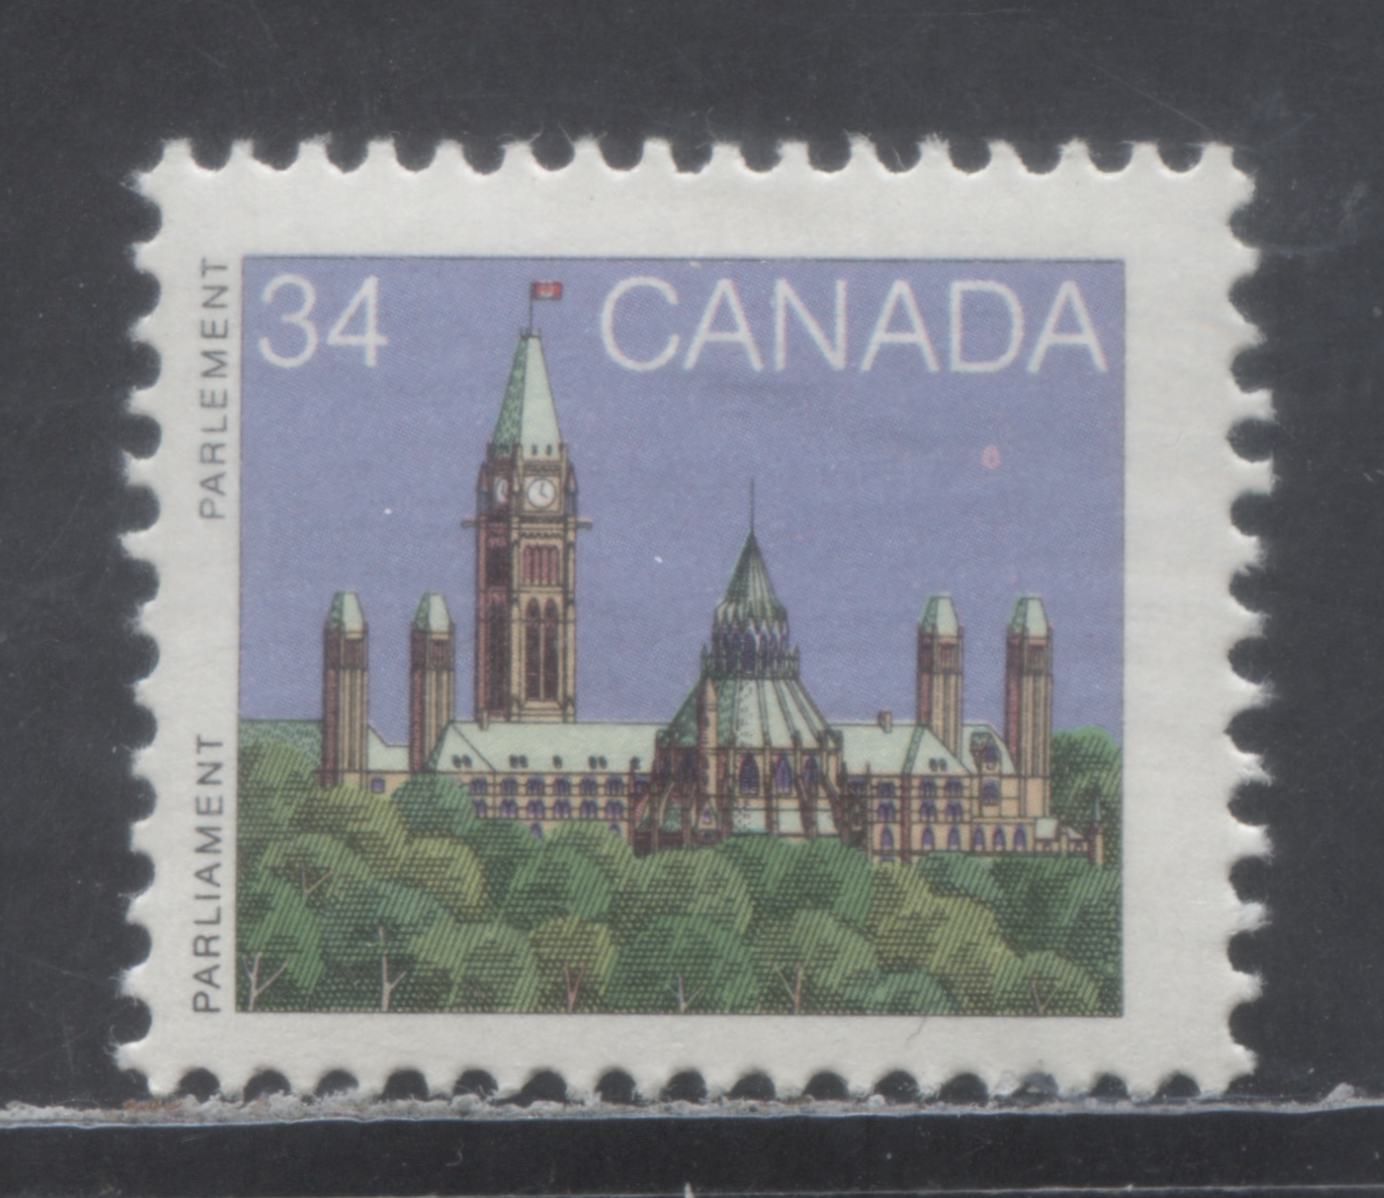 Lot 327 Canada #925 34c Multicolored Parliament Building, 1985-1987 First Class Definitives, A VFNH Single On DF/DF Harrison Paper With 'Moon Over Towers' Variety, Possibly Constant, Lavender Sky